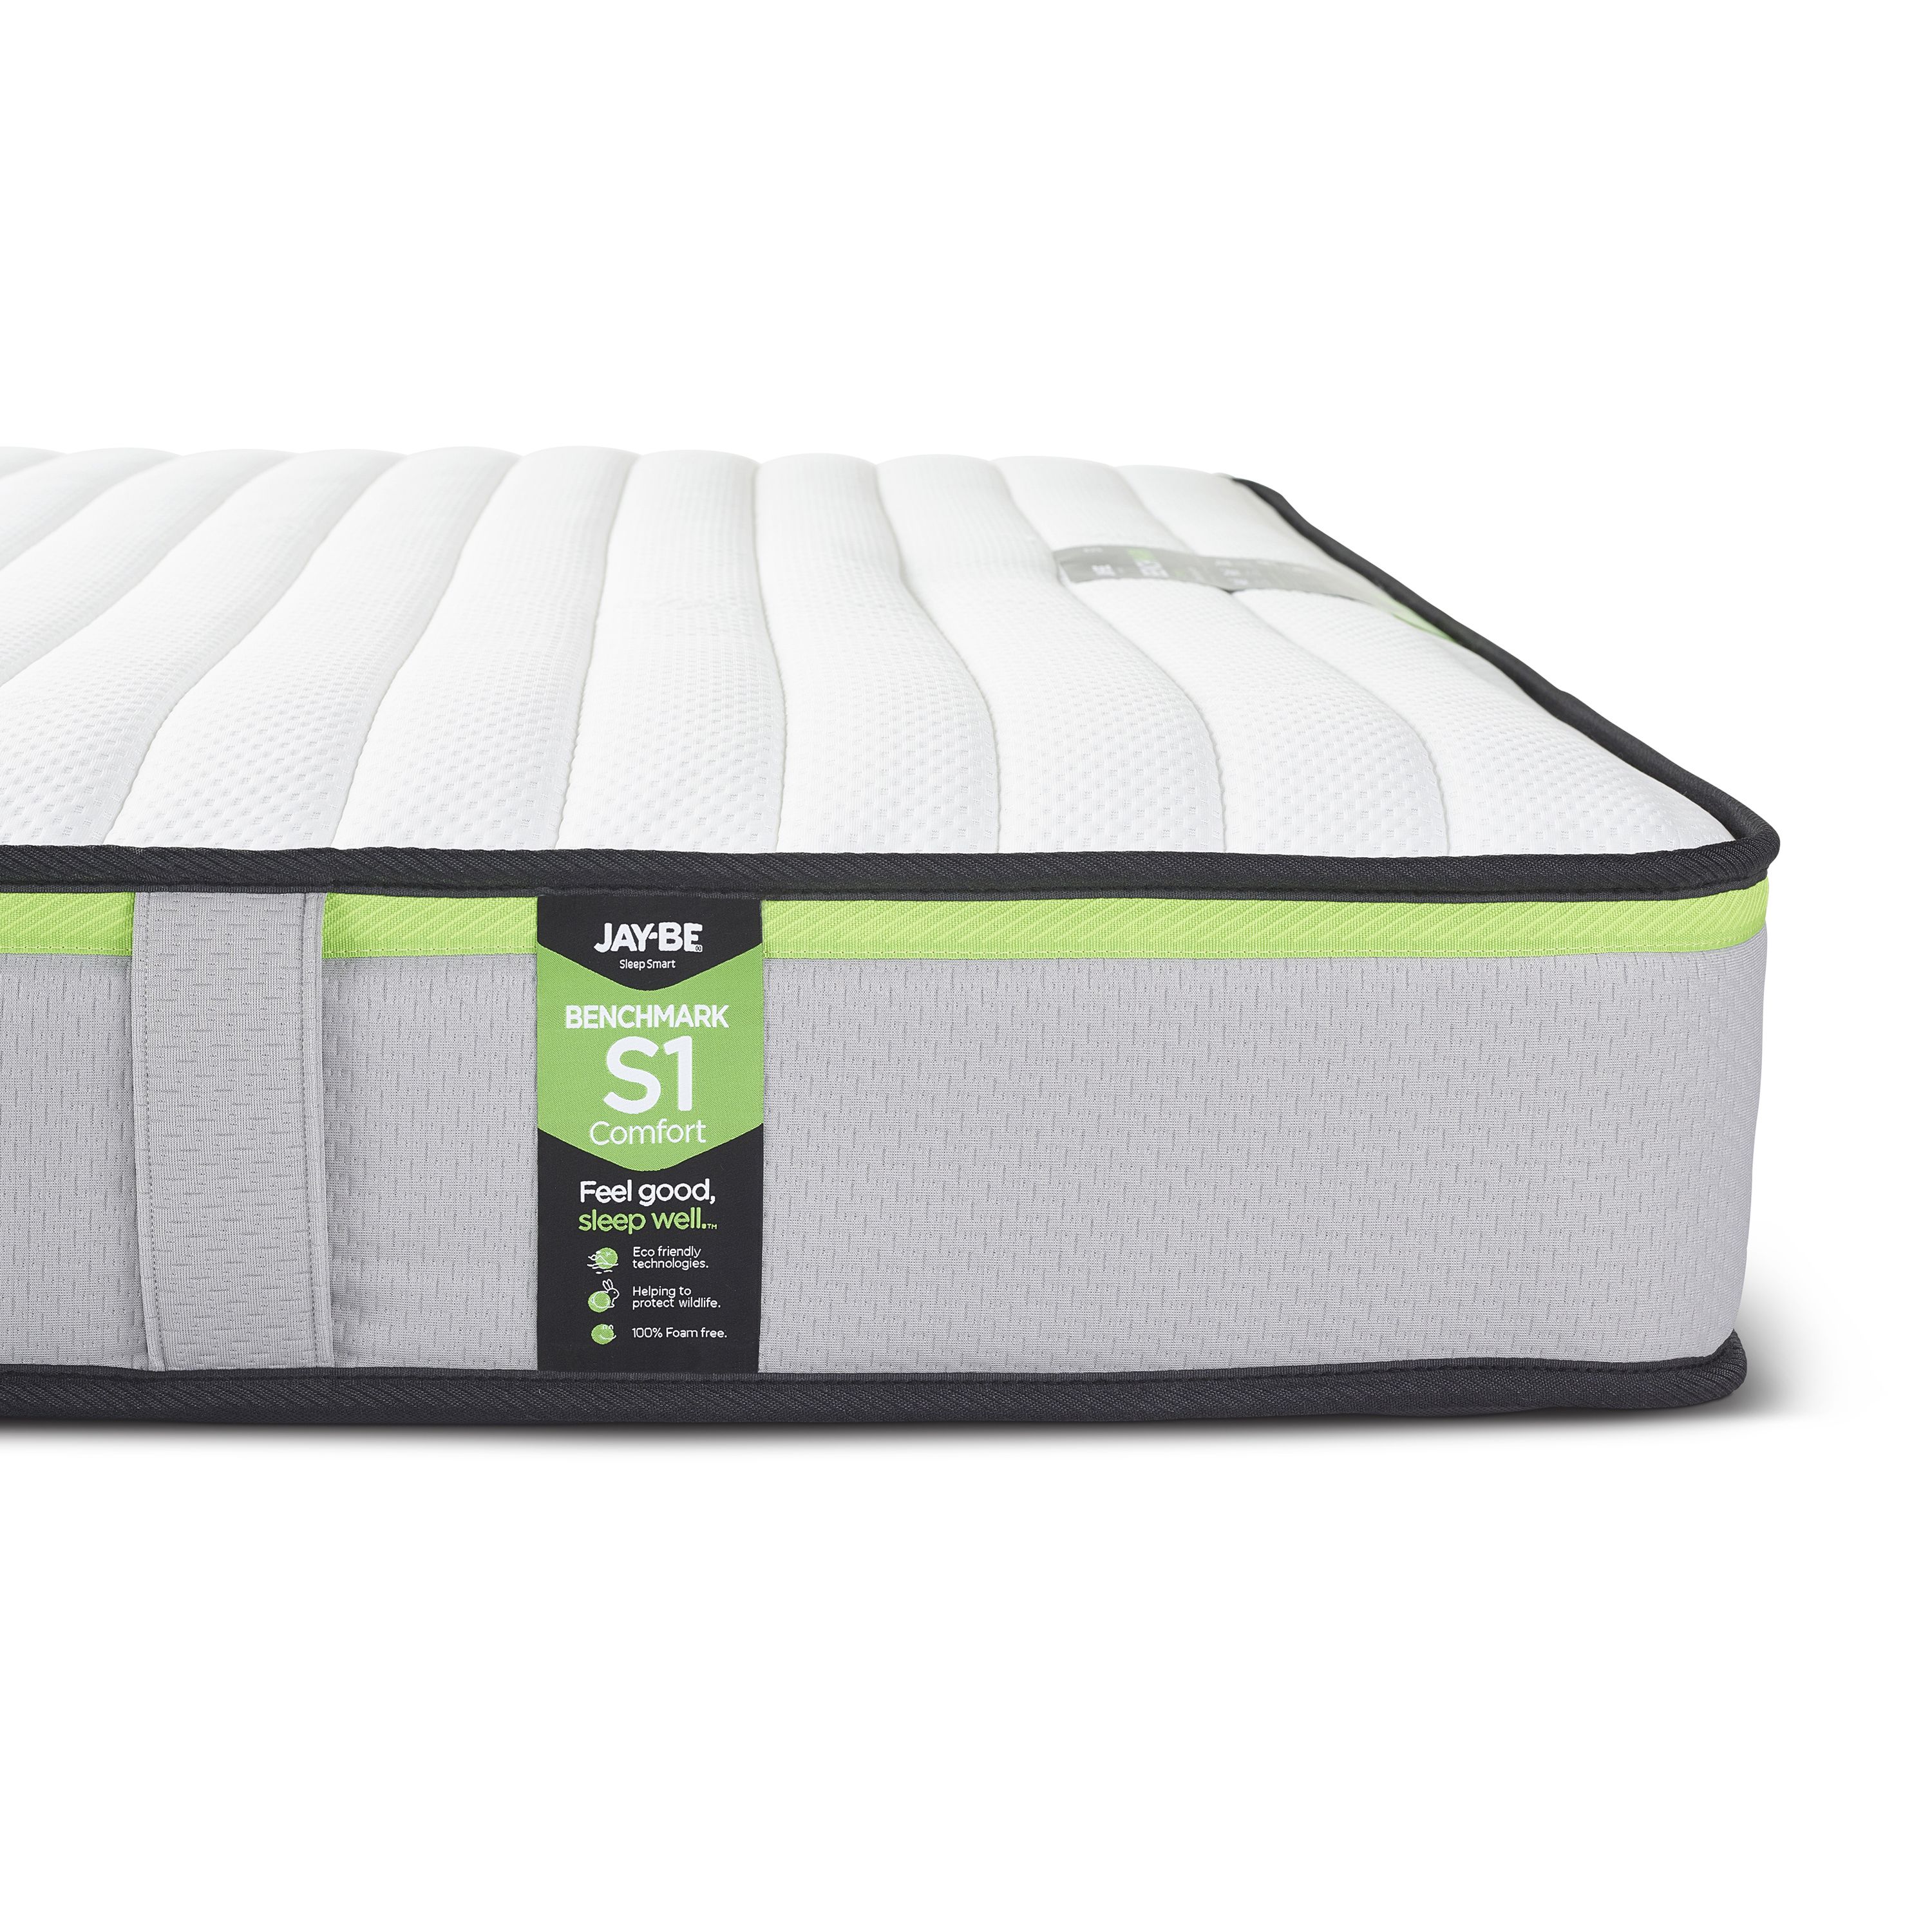 Jay-Be Benchmark S1 Comfort Eco Friendly Open coil Water resistant Small double Mattress